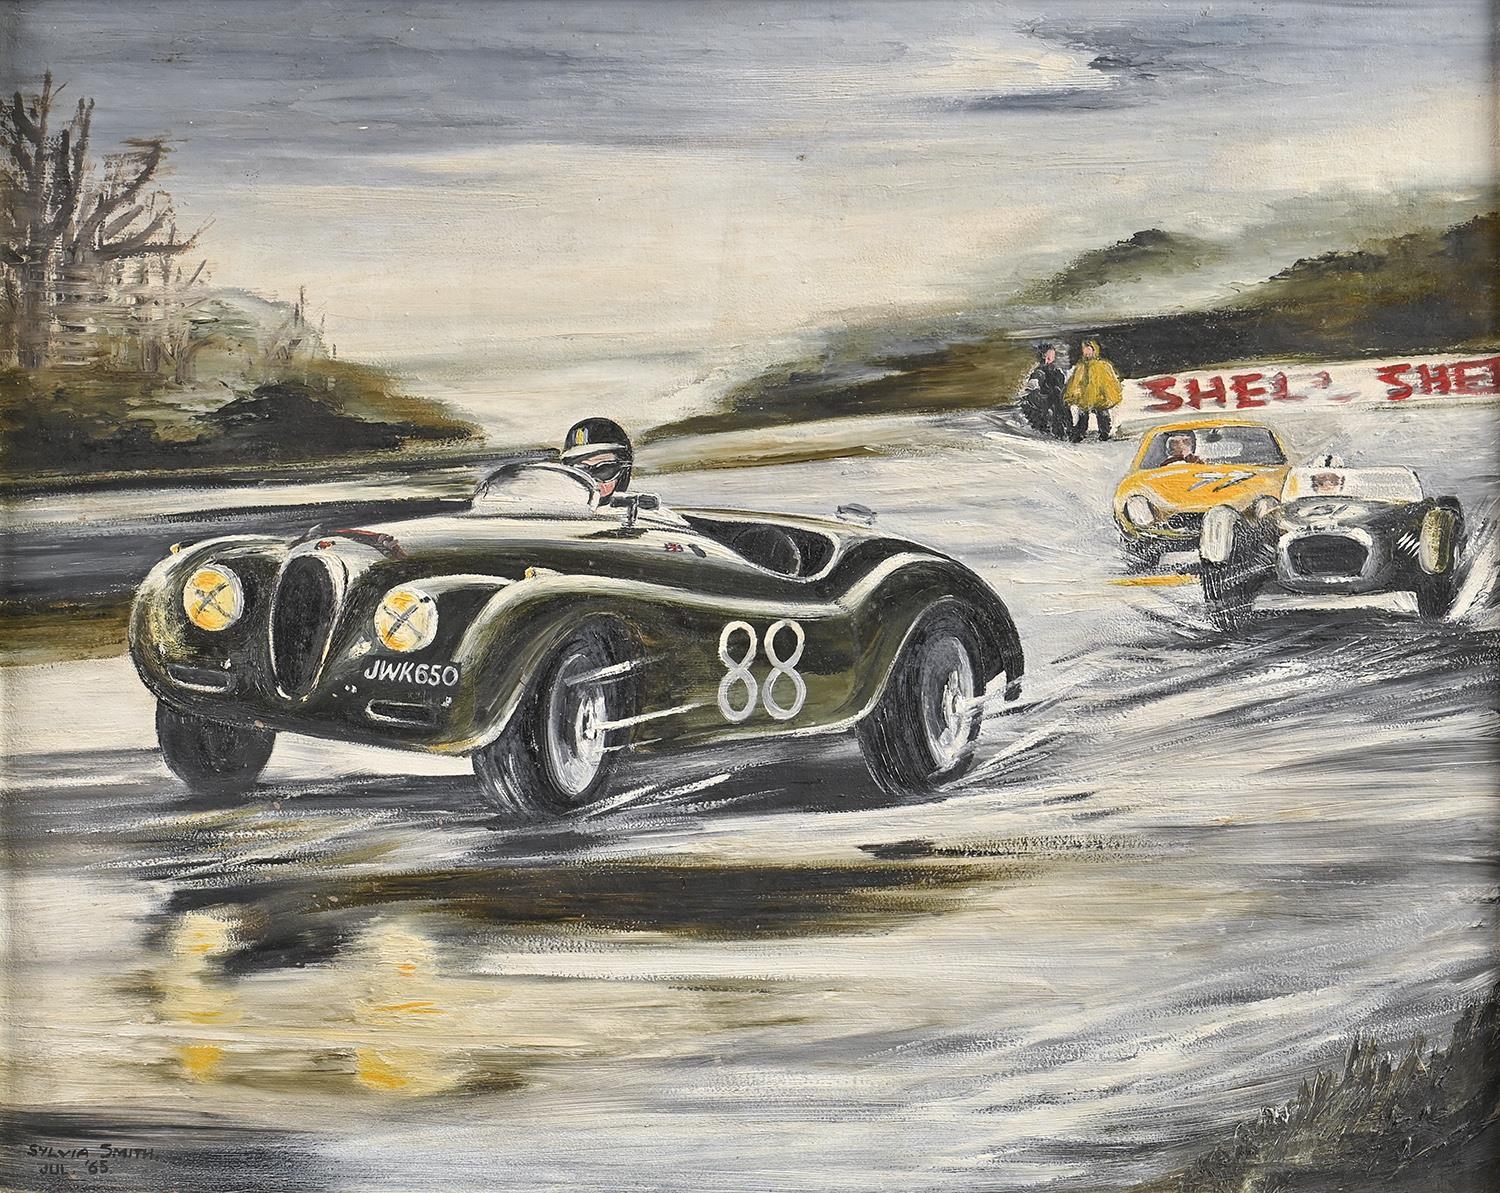 Sylvia Smith, 1965 - Jaguar XK120 in the Lead, signed and dated Jul '65, oil on canvas, 59 x 75cm